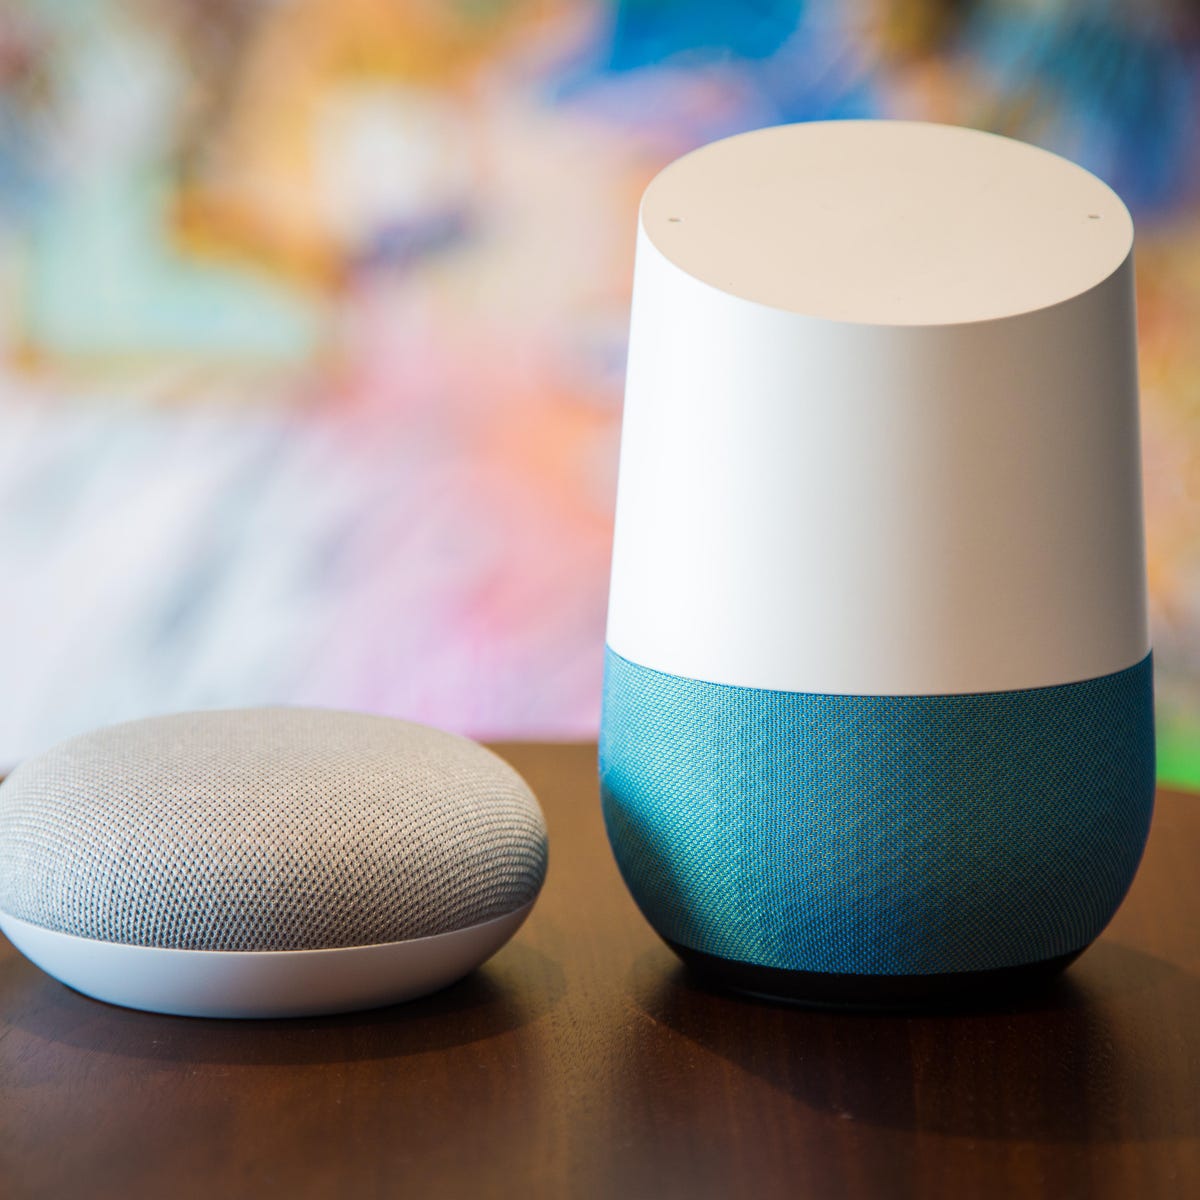 camino patata junto a How to turn on any TV with Google Home - CNET